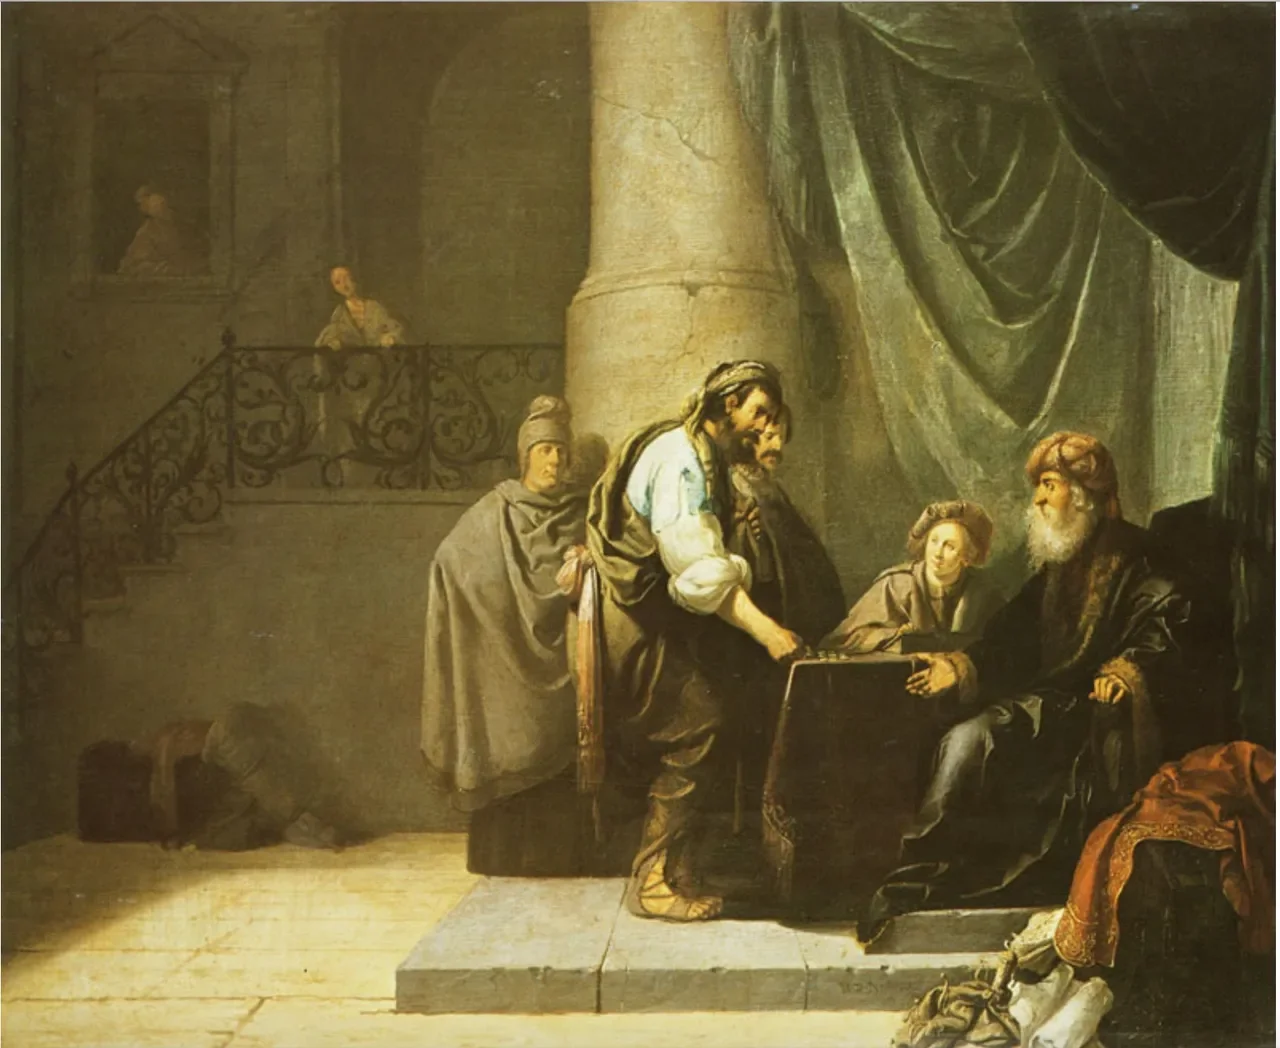 The Parable of the Talents by Willem de Poorter (Image Source: WikiMedia Commons)